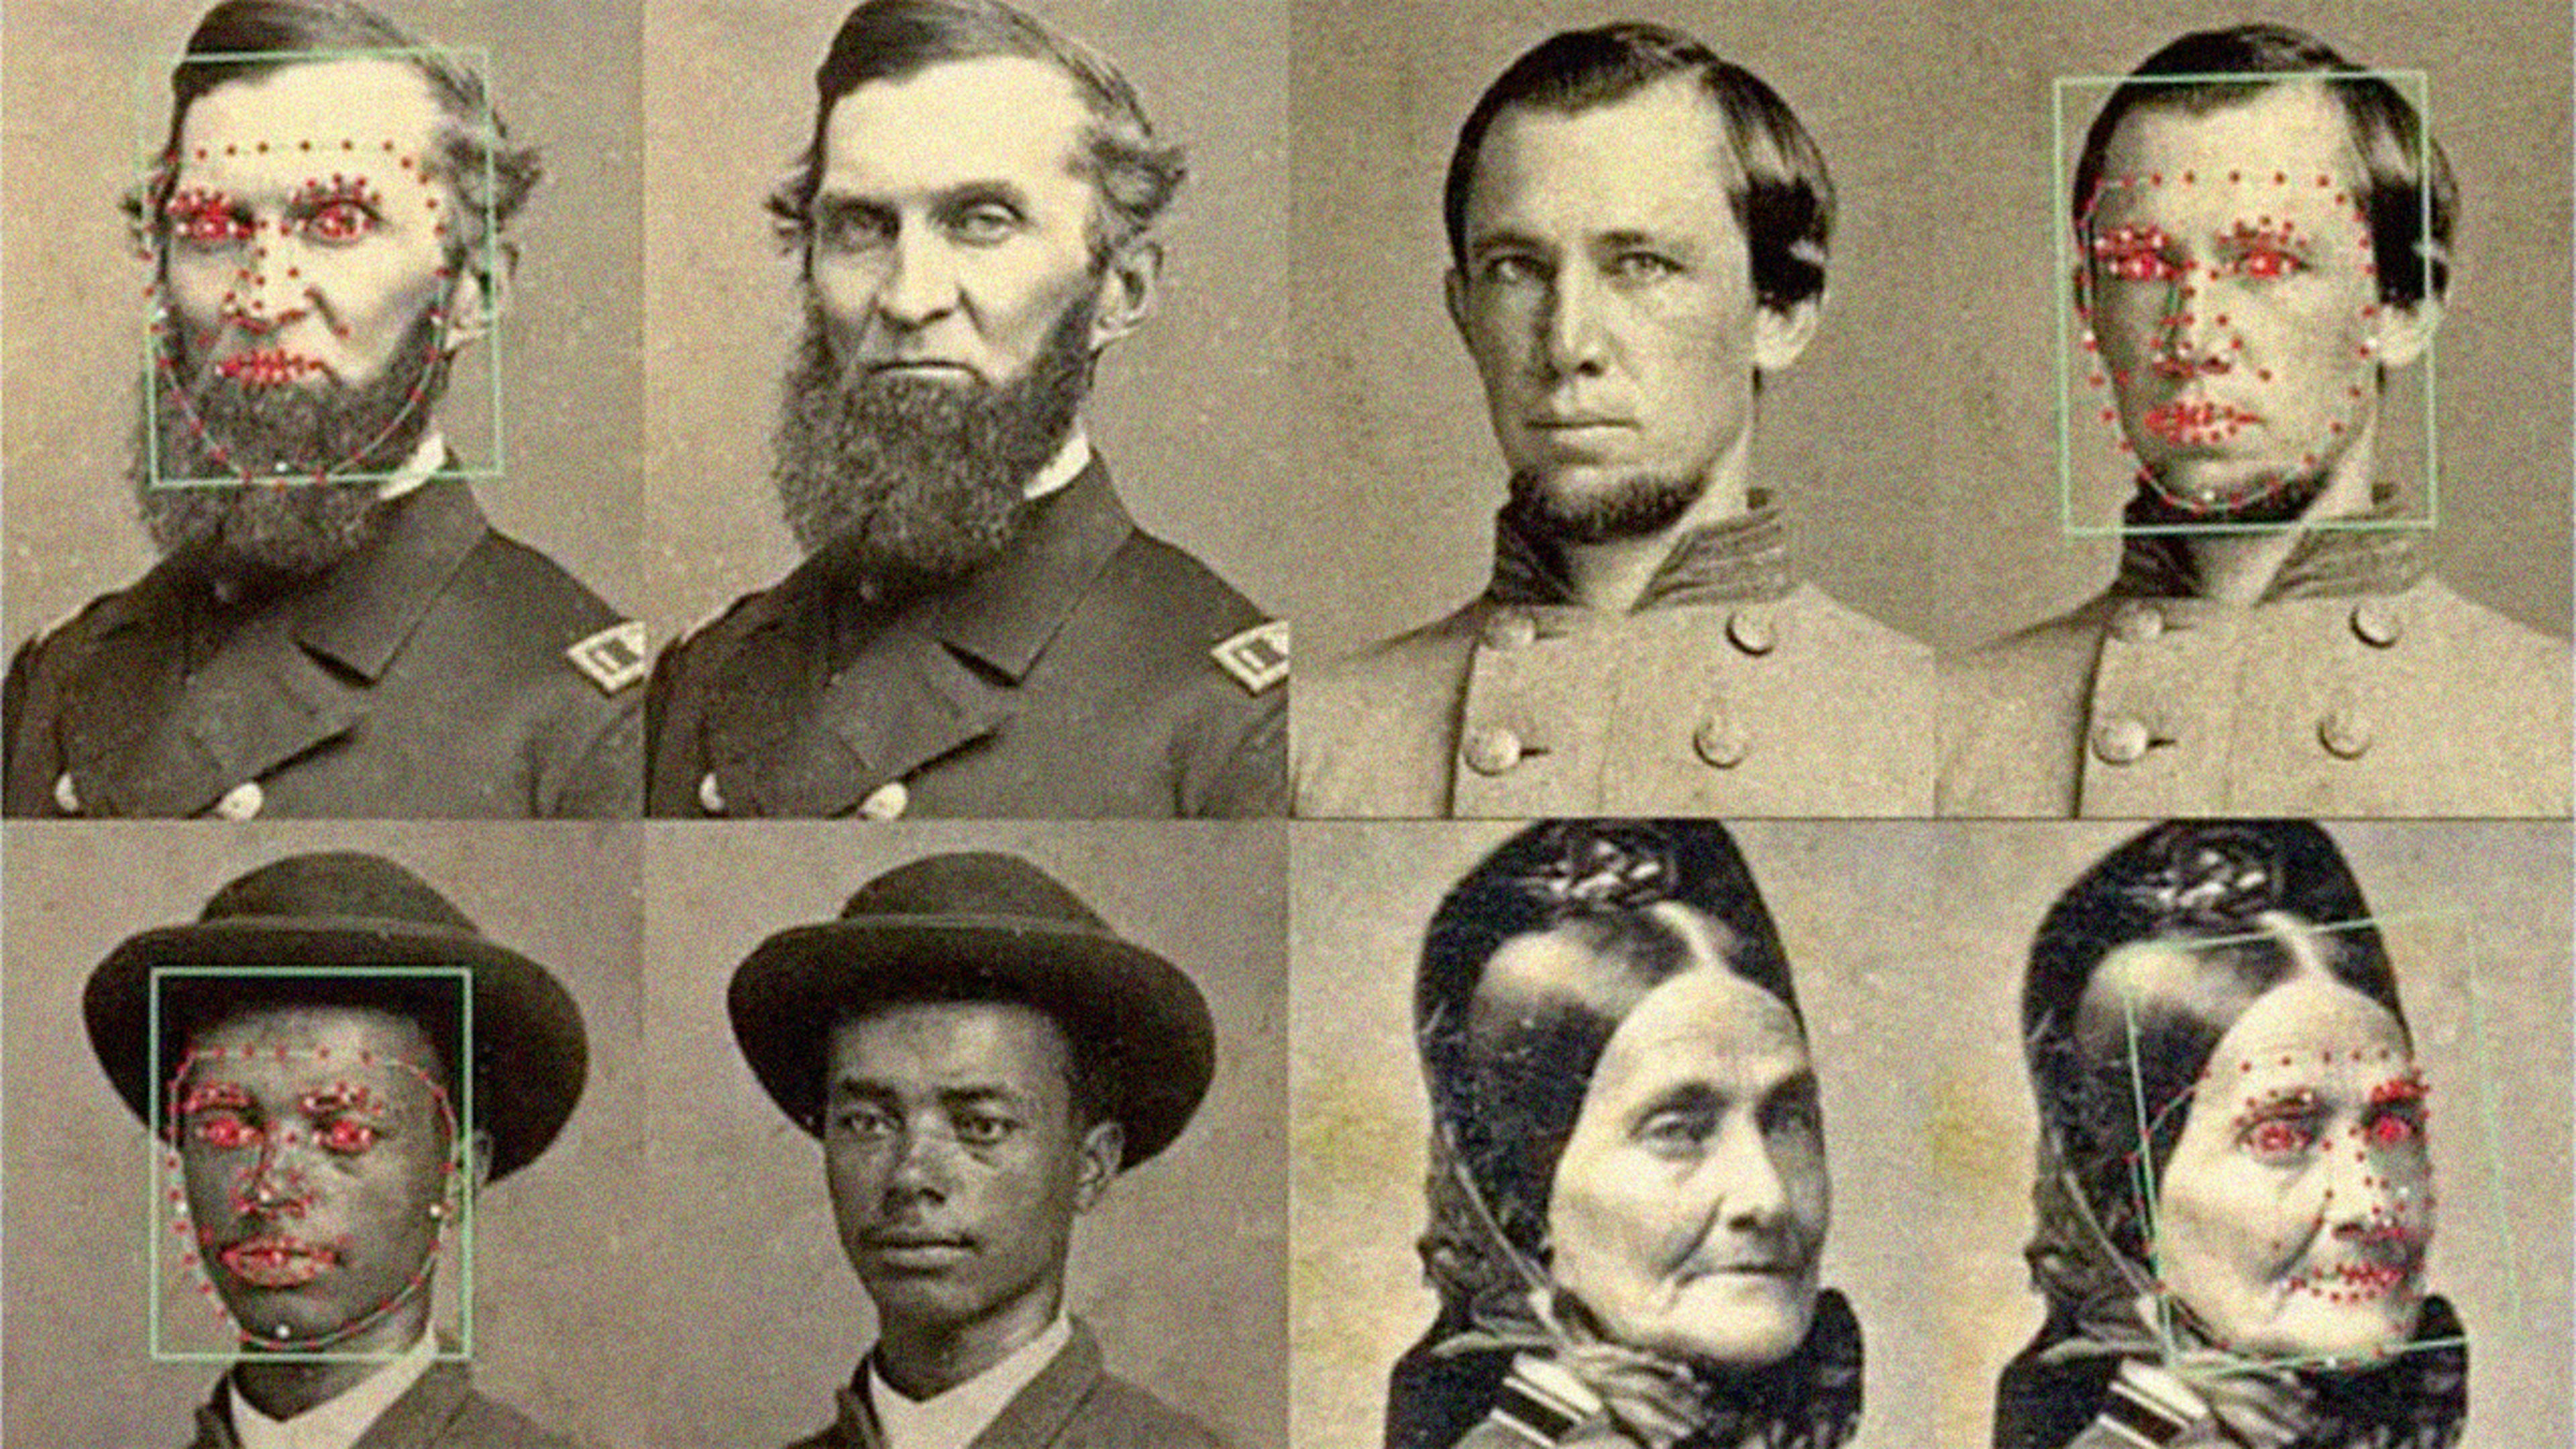 Online sleuths are using face recognition to identify Civil War soldiers in old photographs